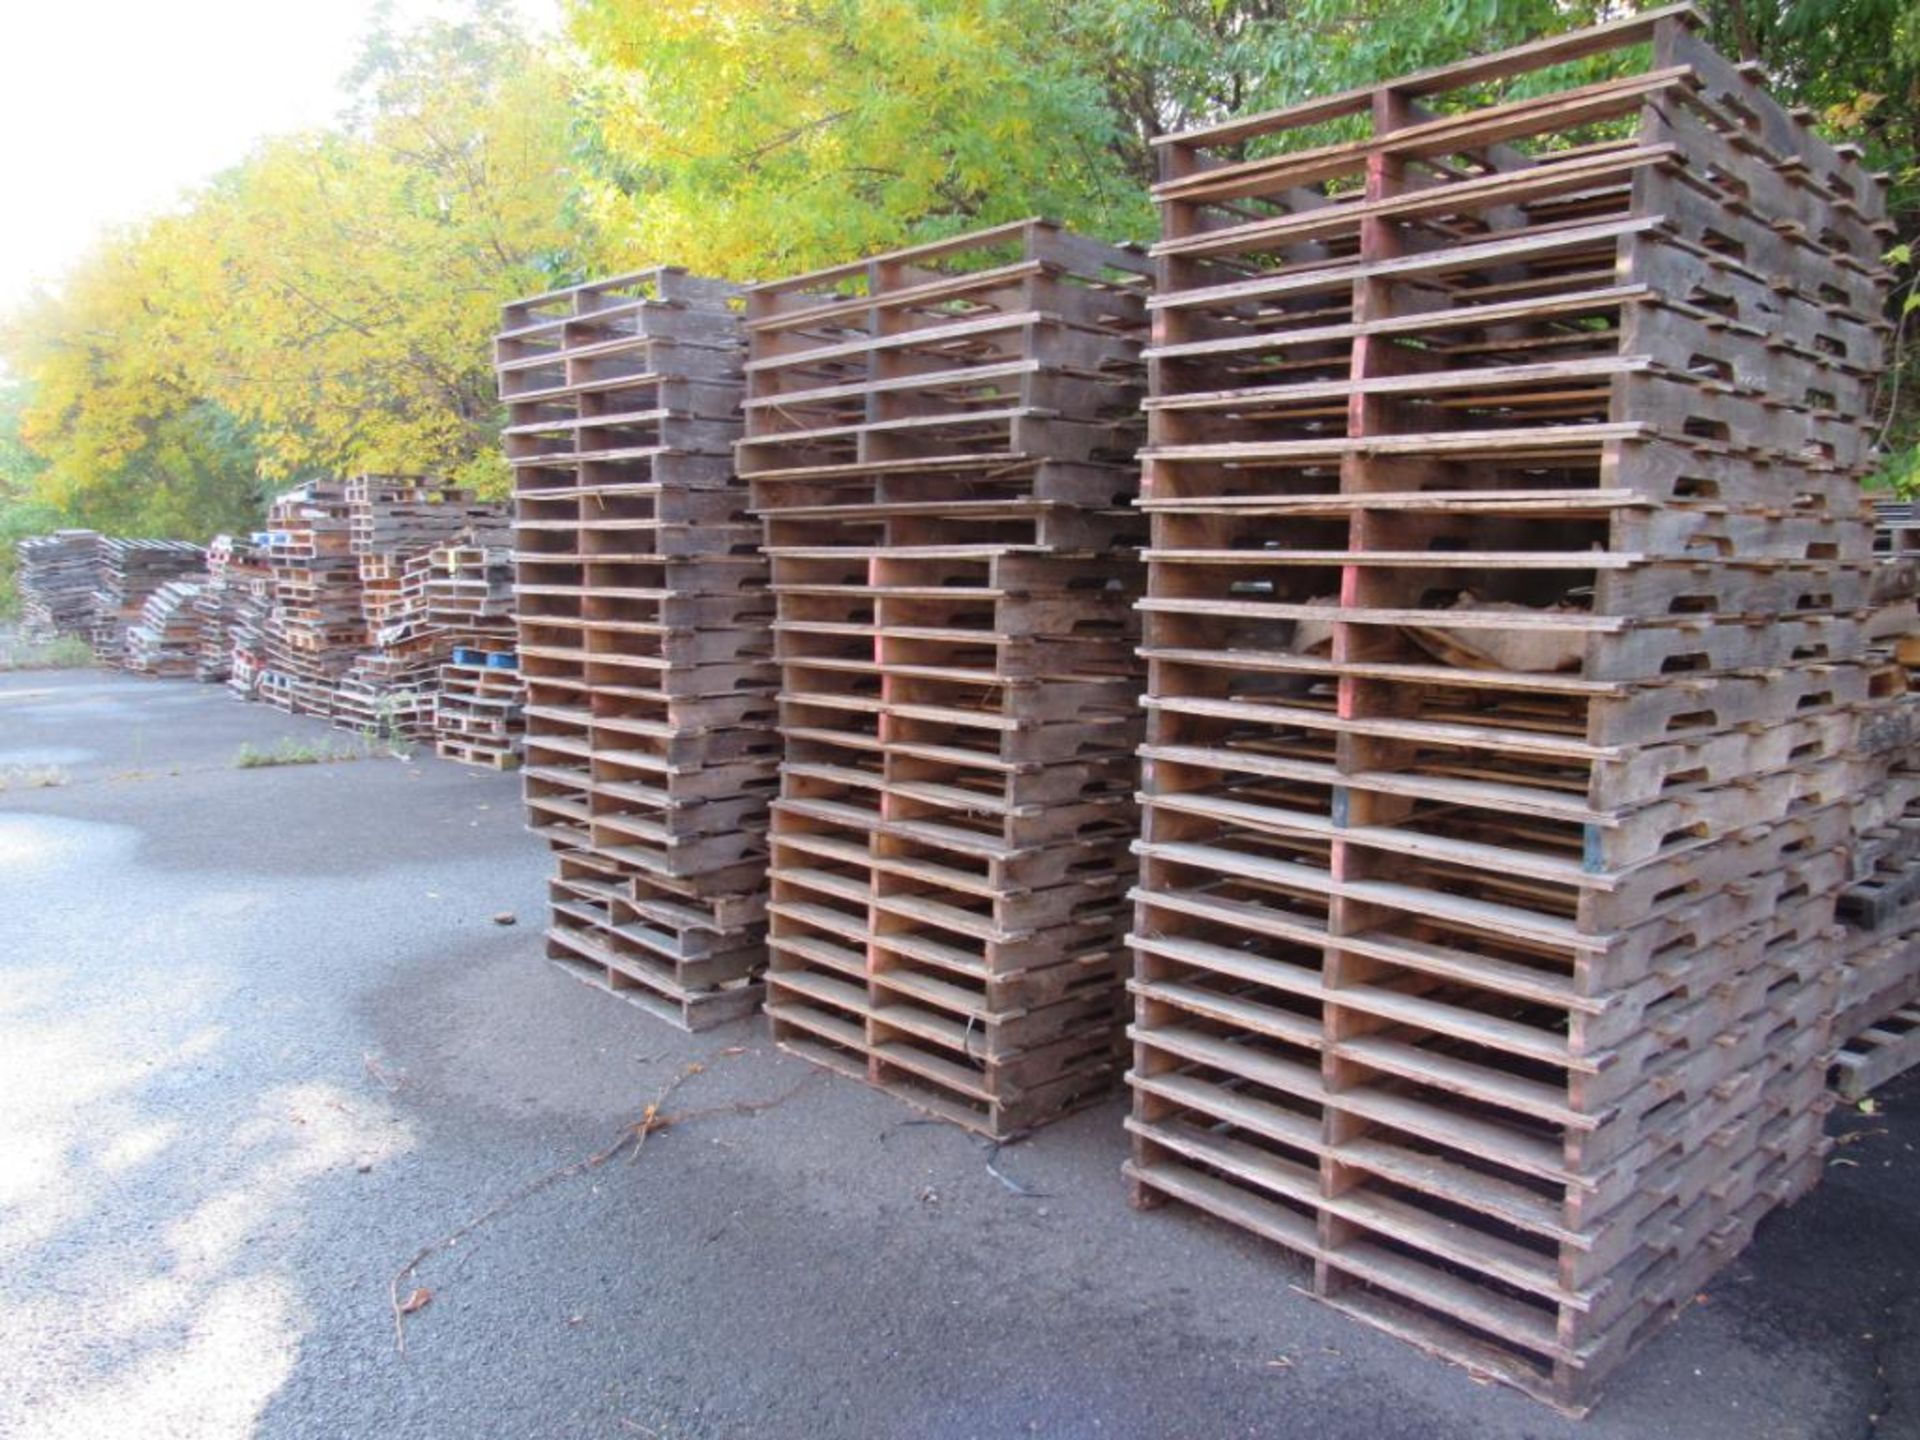 LOT: Approx. (600) Wooden Skids (various sizes) (Location J-2 across from Dock Doors)